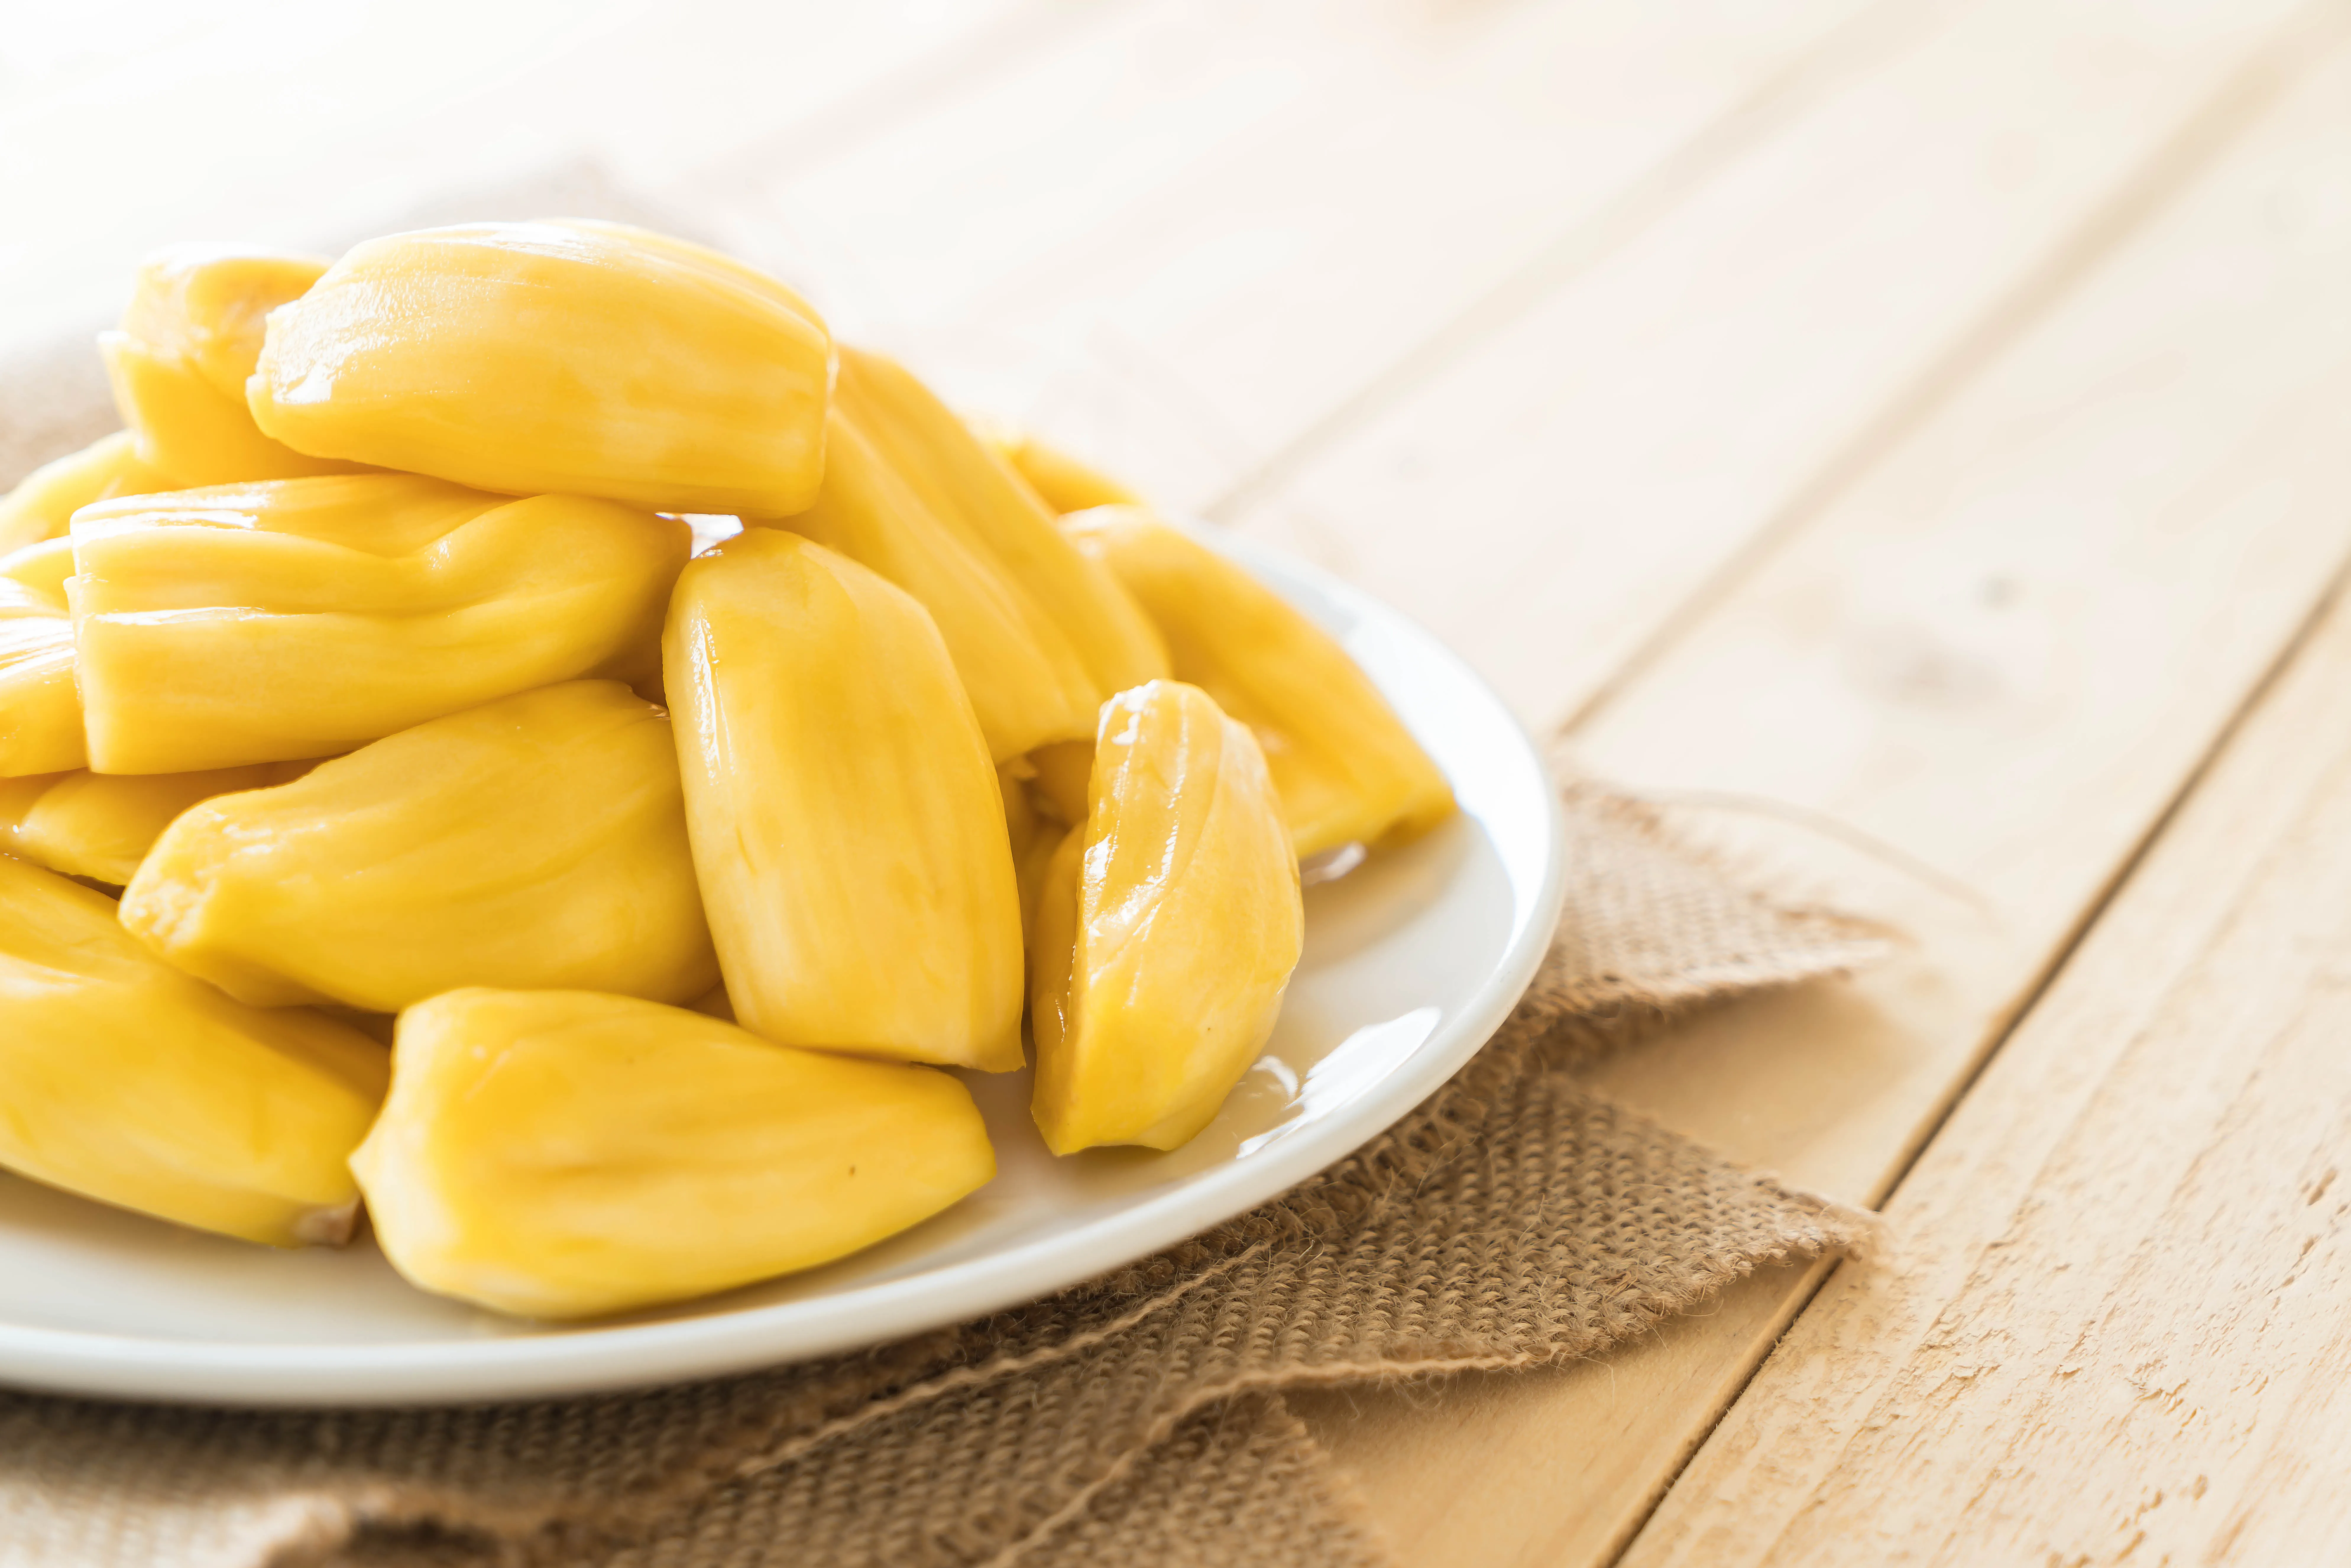 Jackfruit Benefits, Nutrition and Side Effects